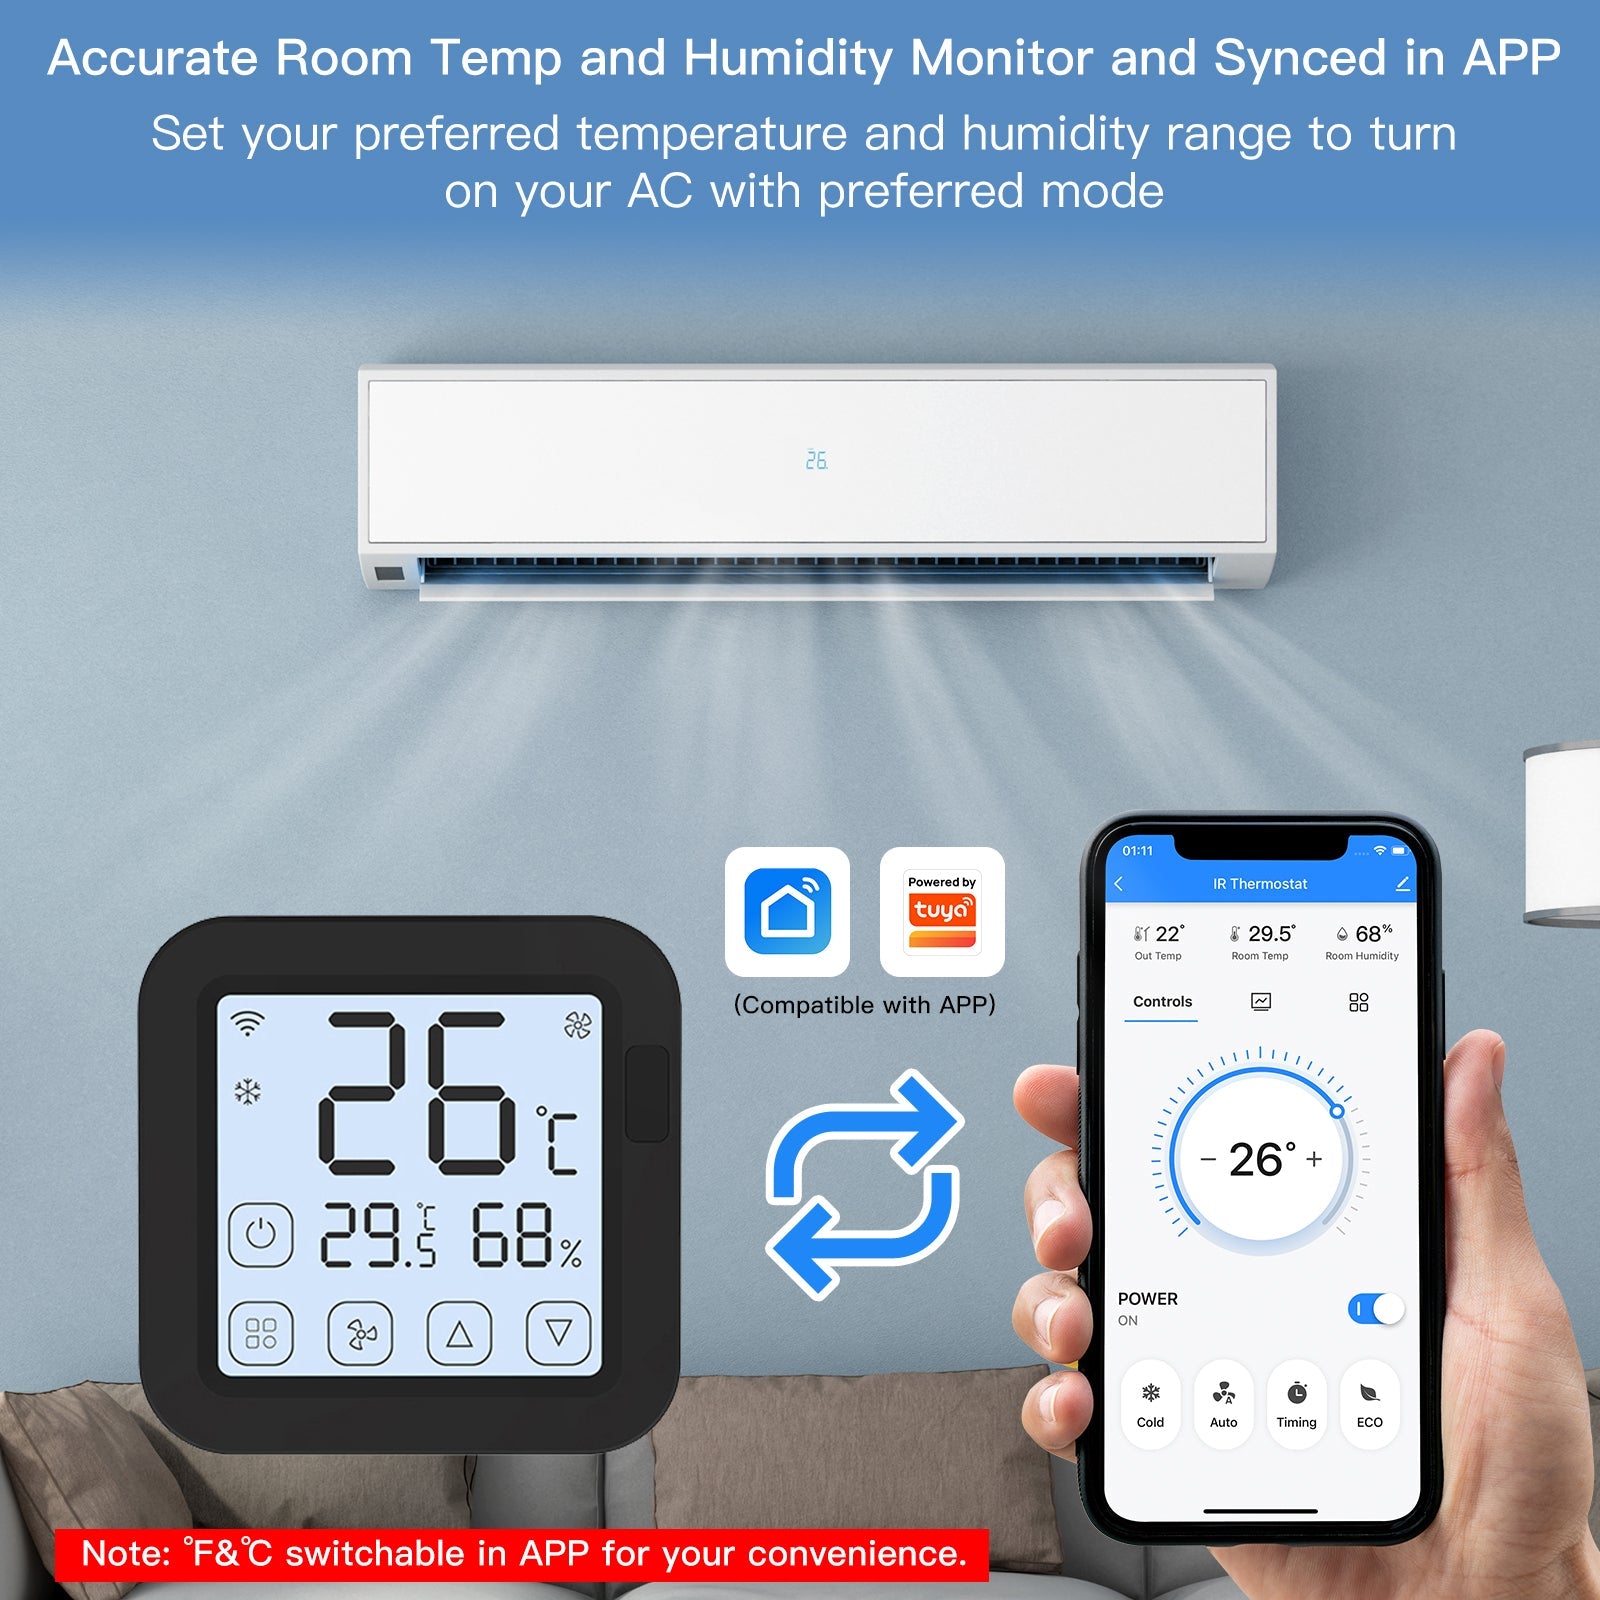 Accurate Room Temp and Humidity Monitor and Synced in APP - MOES